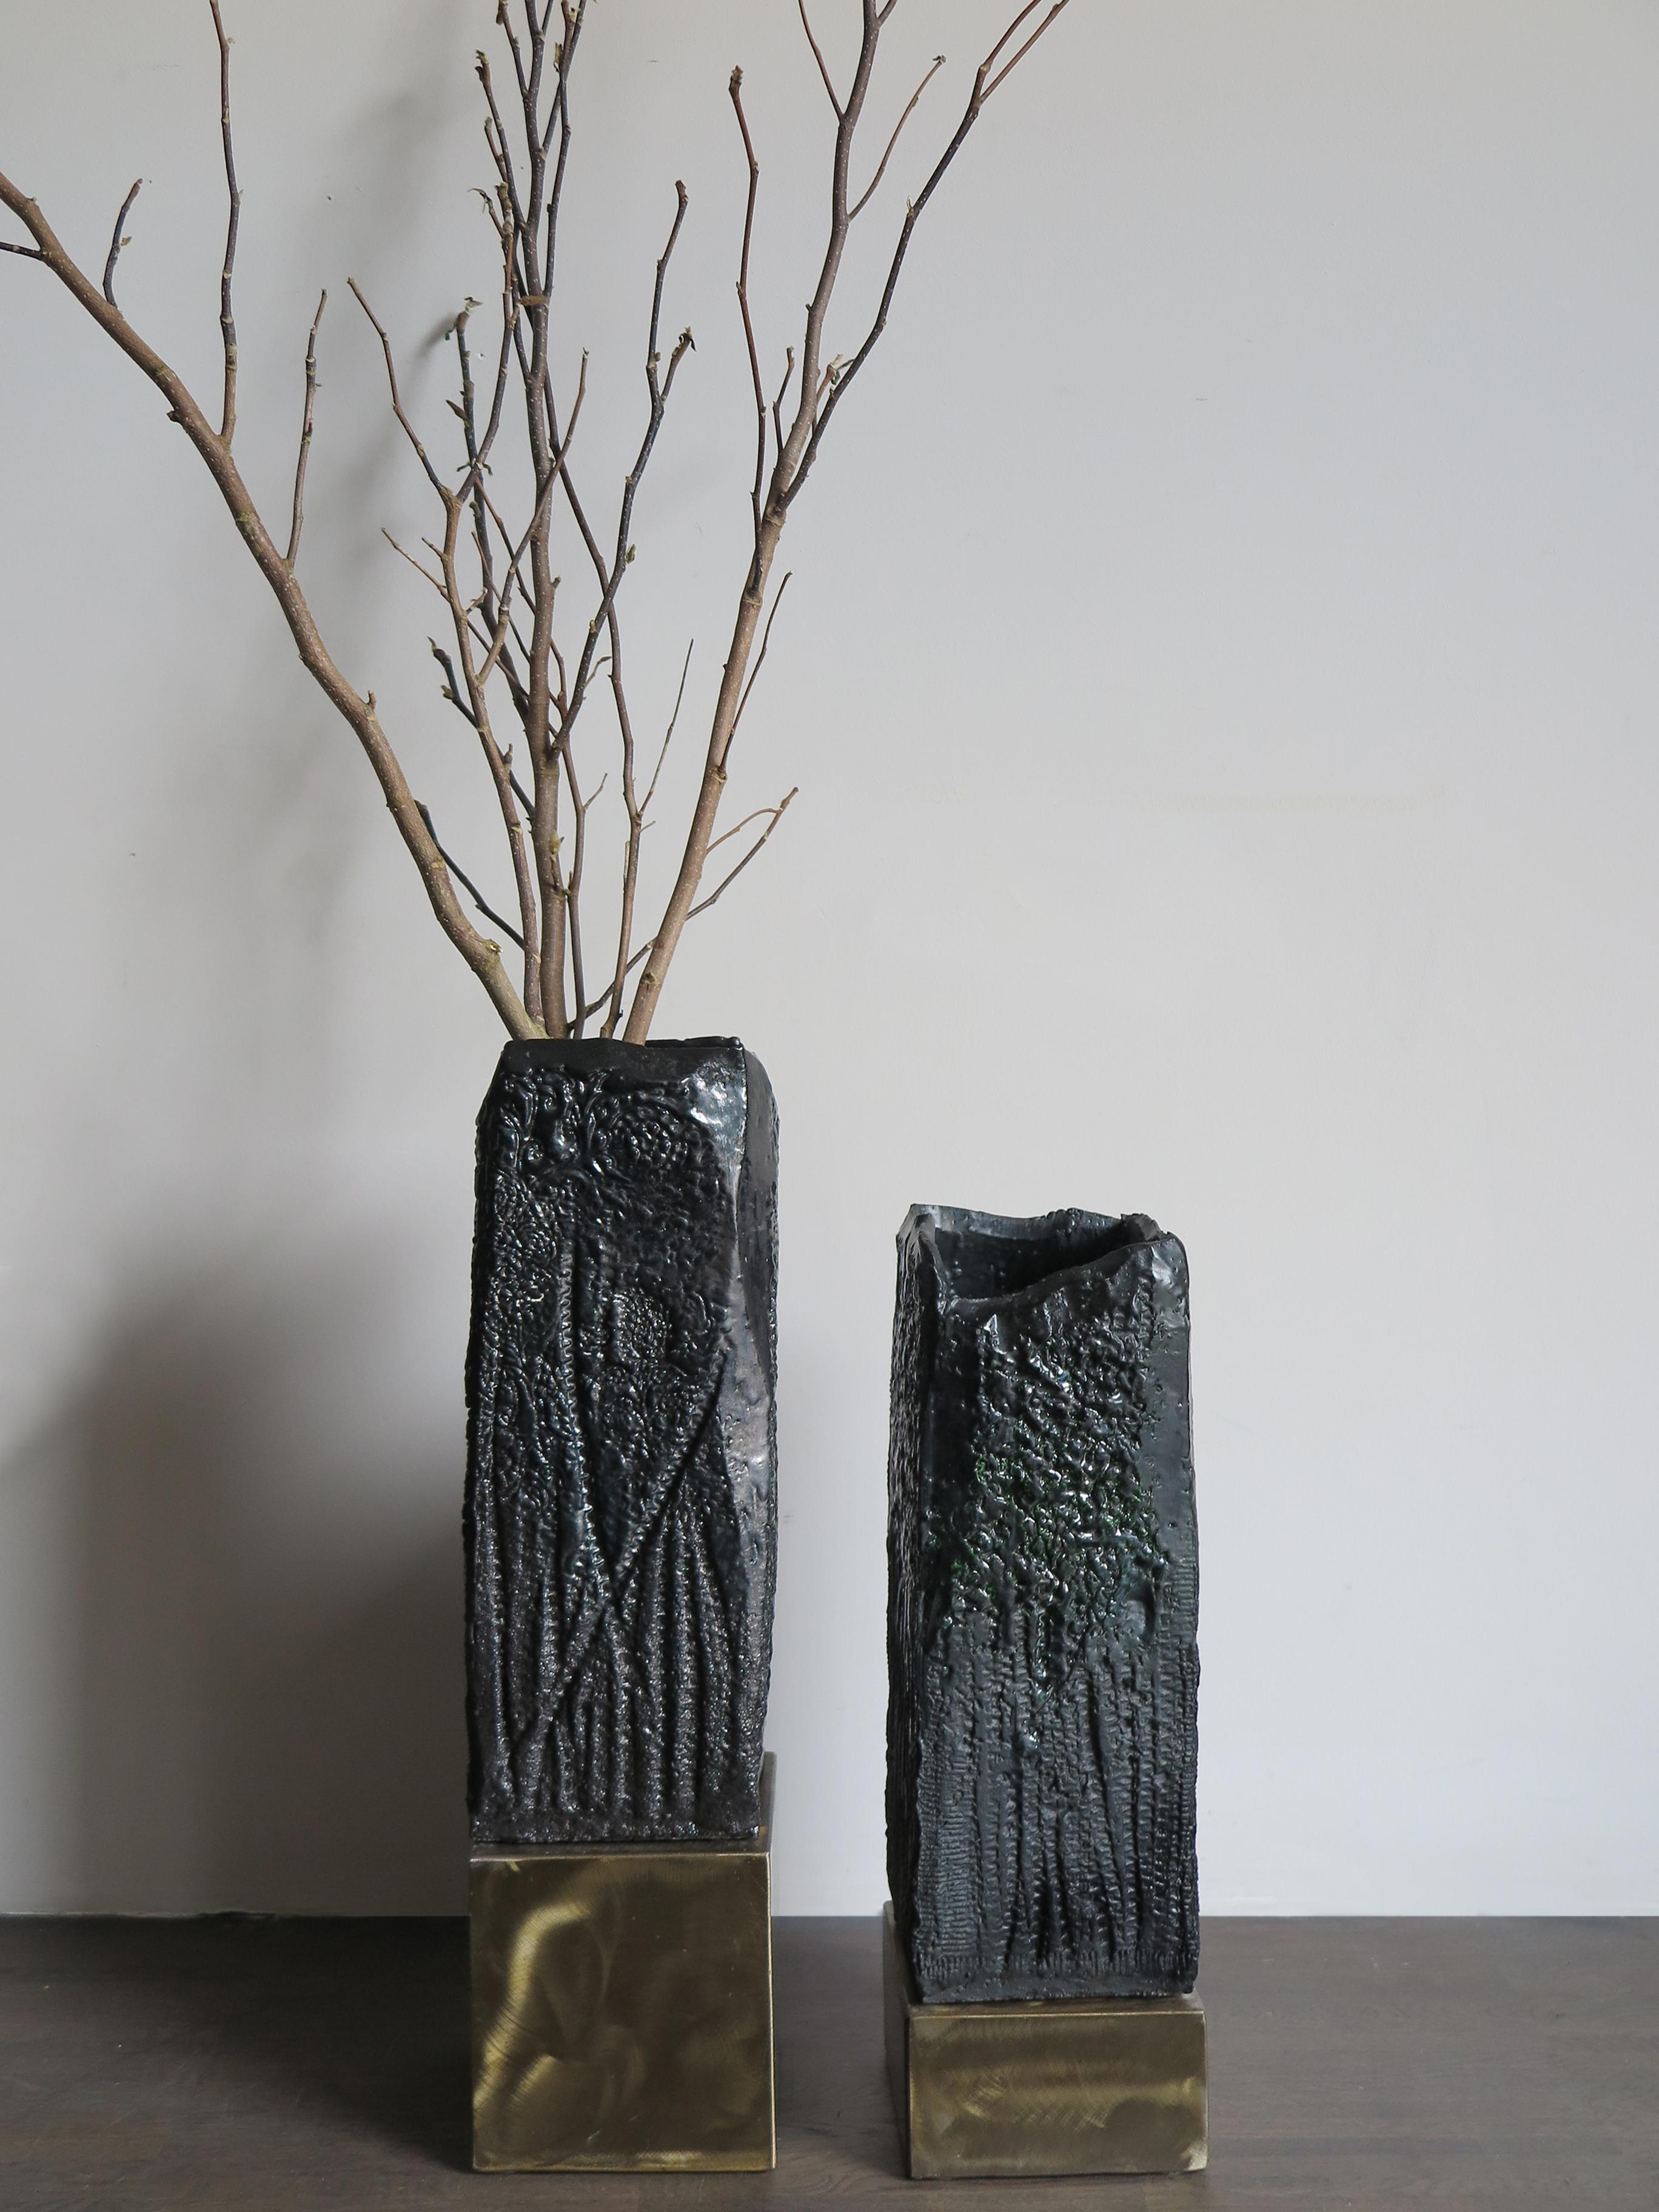 Pair of large contemporary engraved ceramic sculpture vase, black enamel, metal base, new design by Capperidicasa, made in Italy.
dimensions from left:
width 15 cm - height 42 cm - height with base 59 cm - depth 15 cm
width 14 cm - height 40 cm -